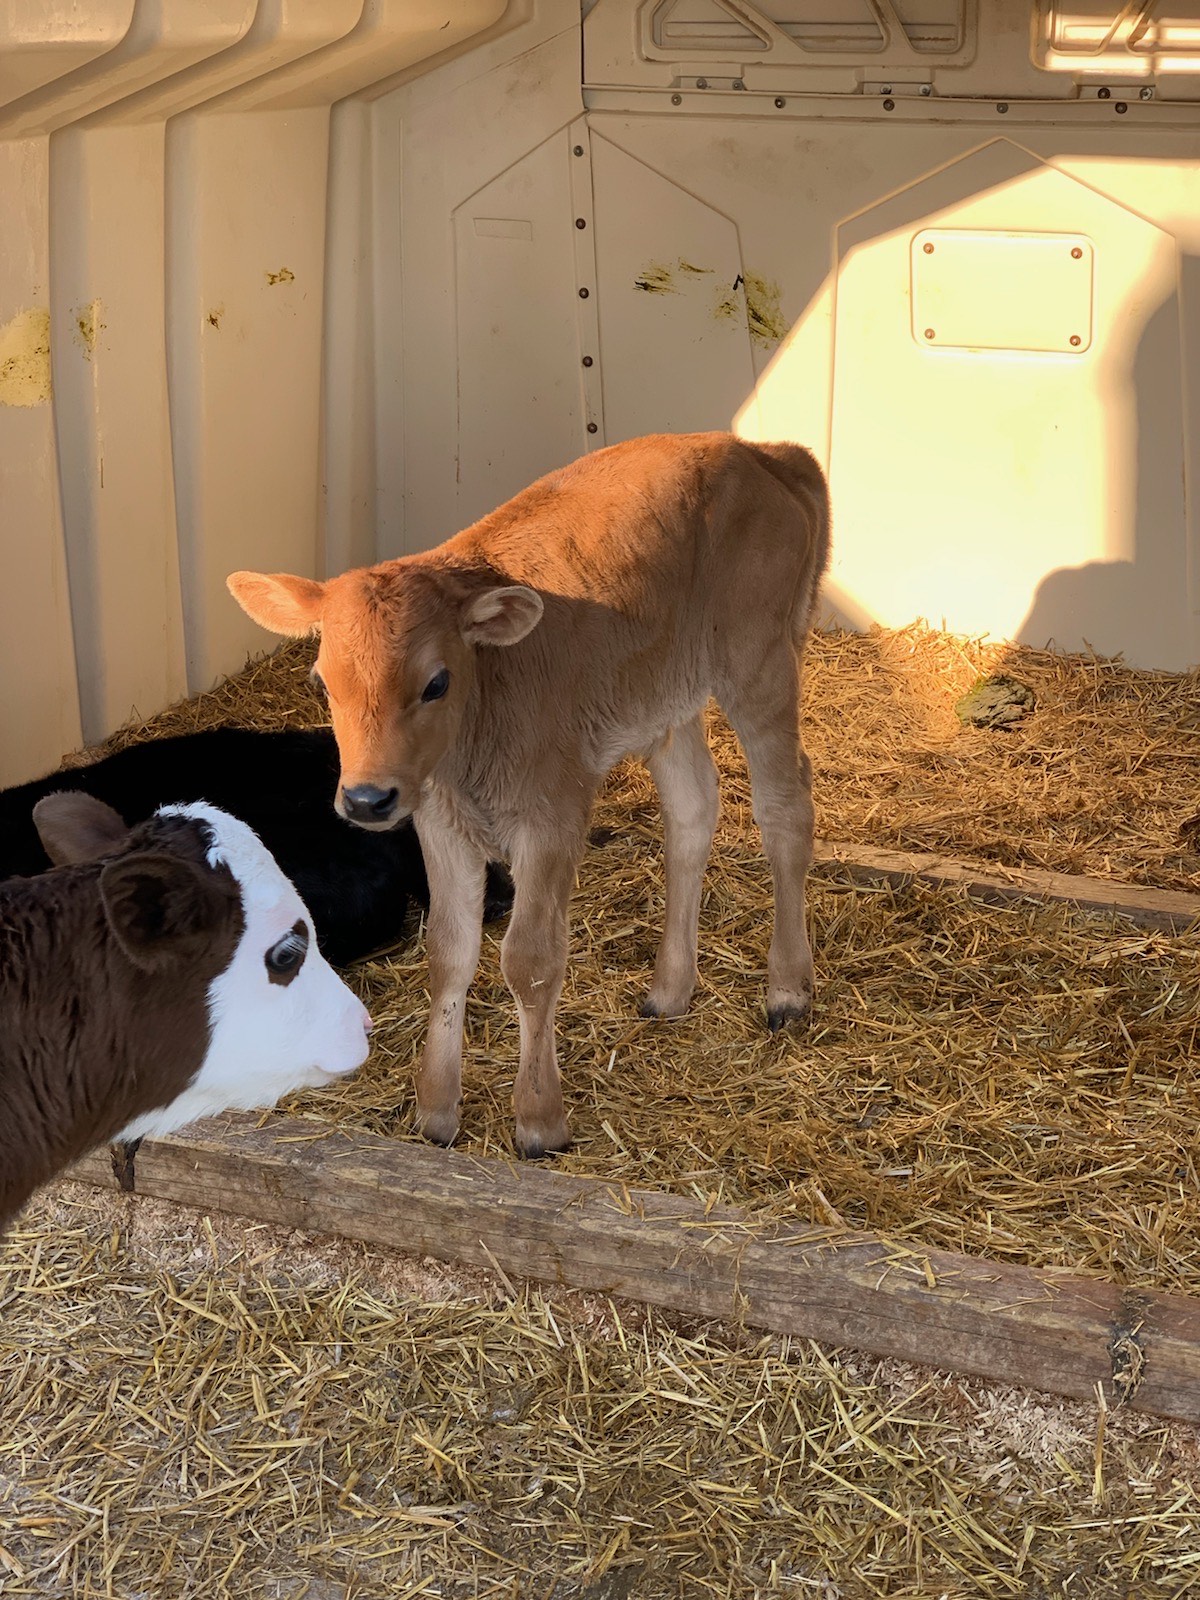 a baby brown cow stands in the center of the frame; another white cow head is visible in the photo as well